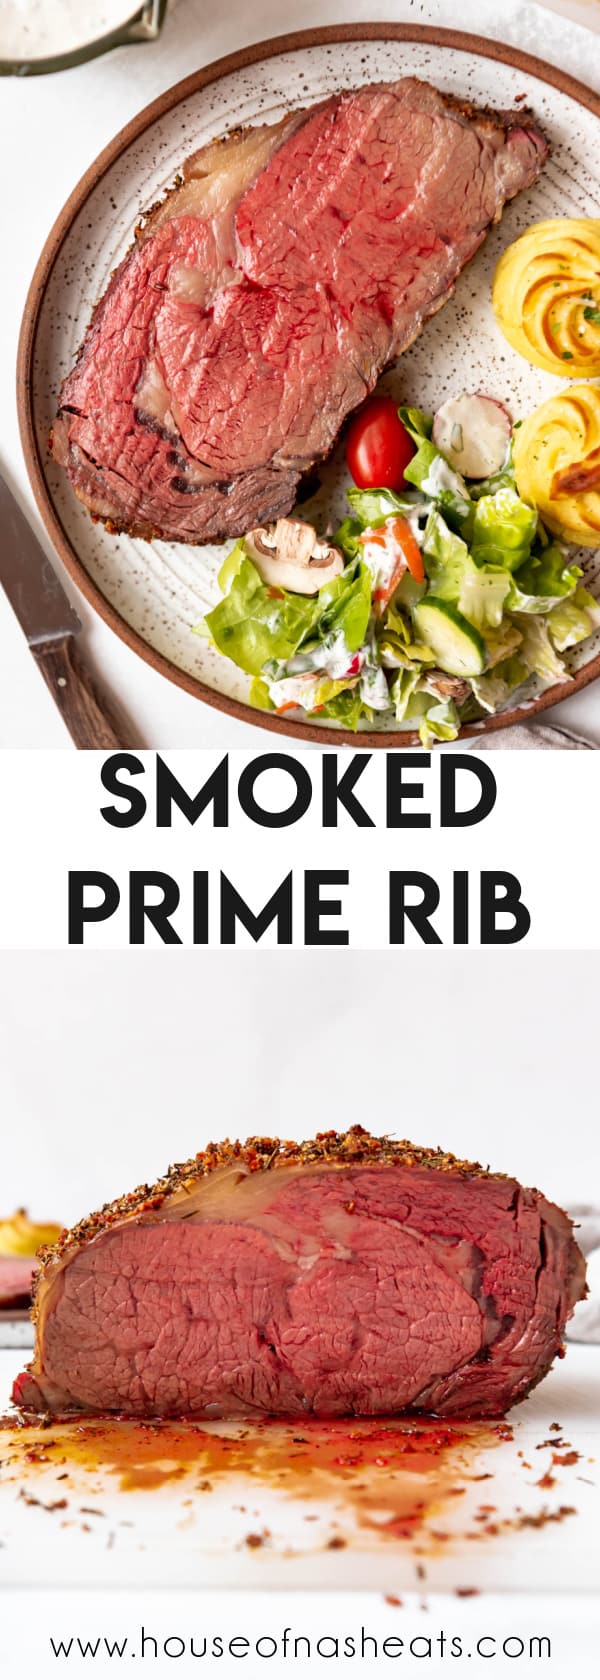 A collage of images of smoked prime rib with text overlay.